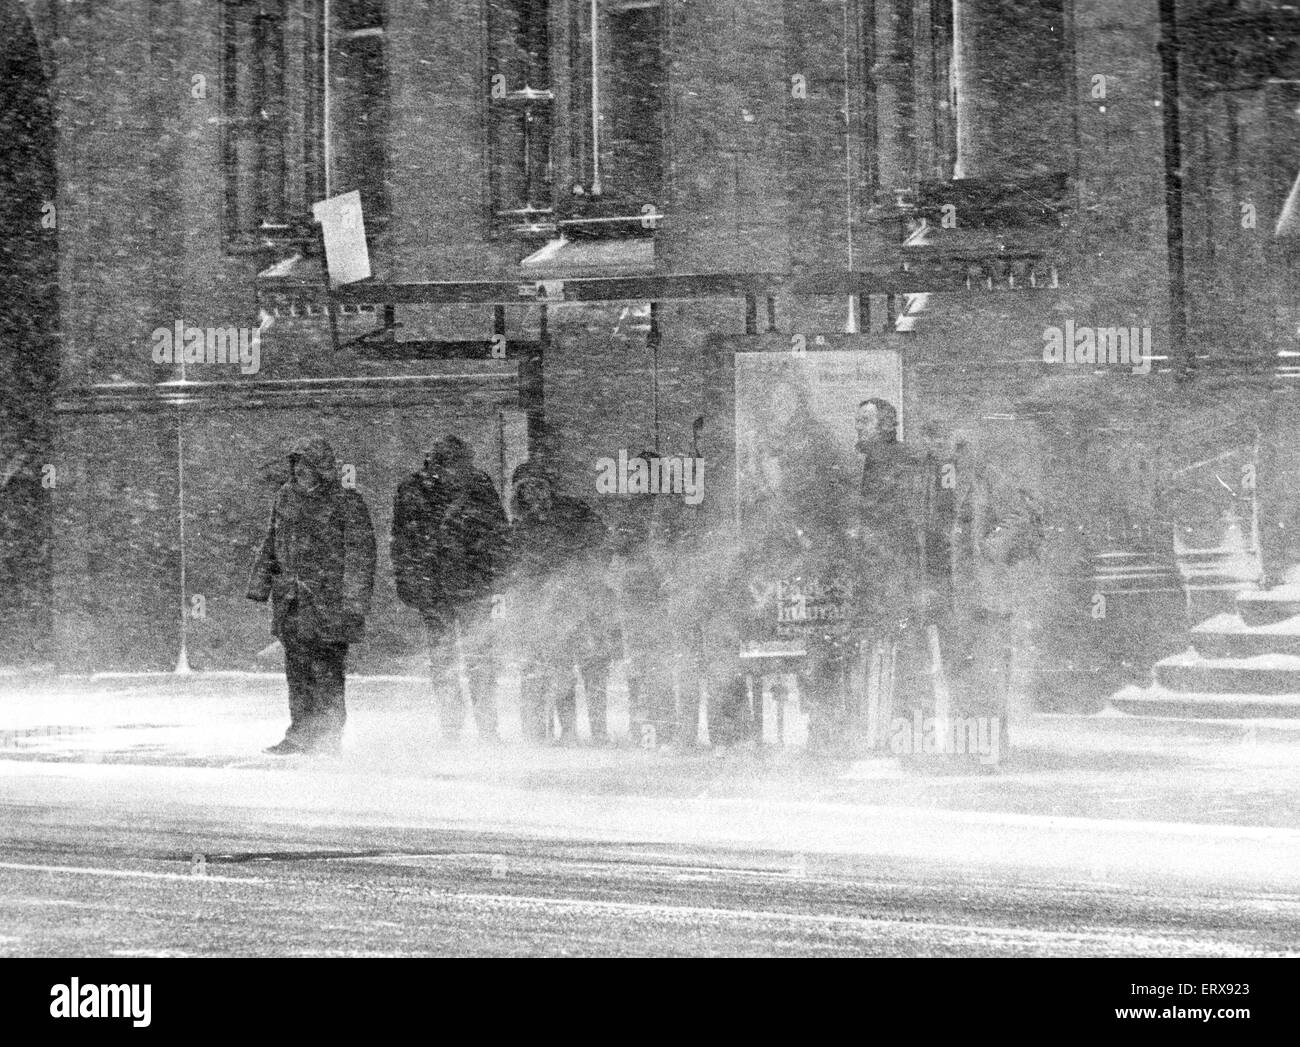 Blizzard conditions felt by Teessiders as they wait for a bus outside the Town Hall, Middlesbrough, 15th February 1979. Stock Photo